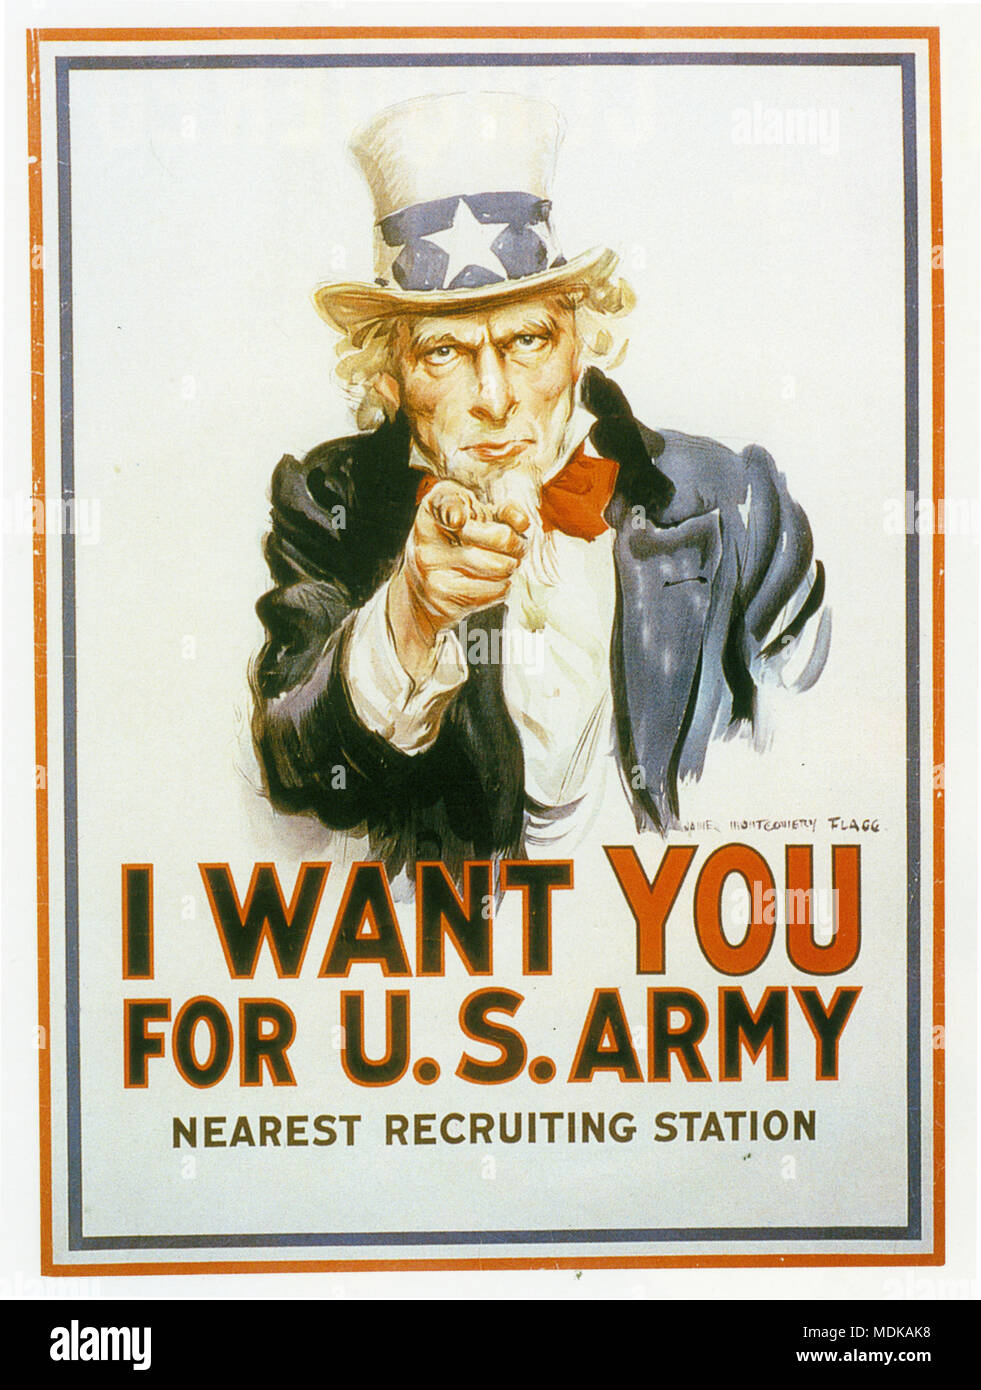 File:J. M. Flagg, I Want You for U.S. Army poster (1917).jpg